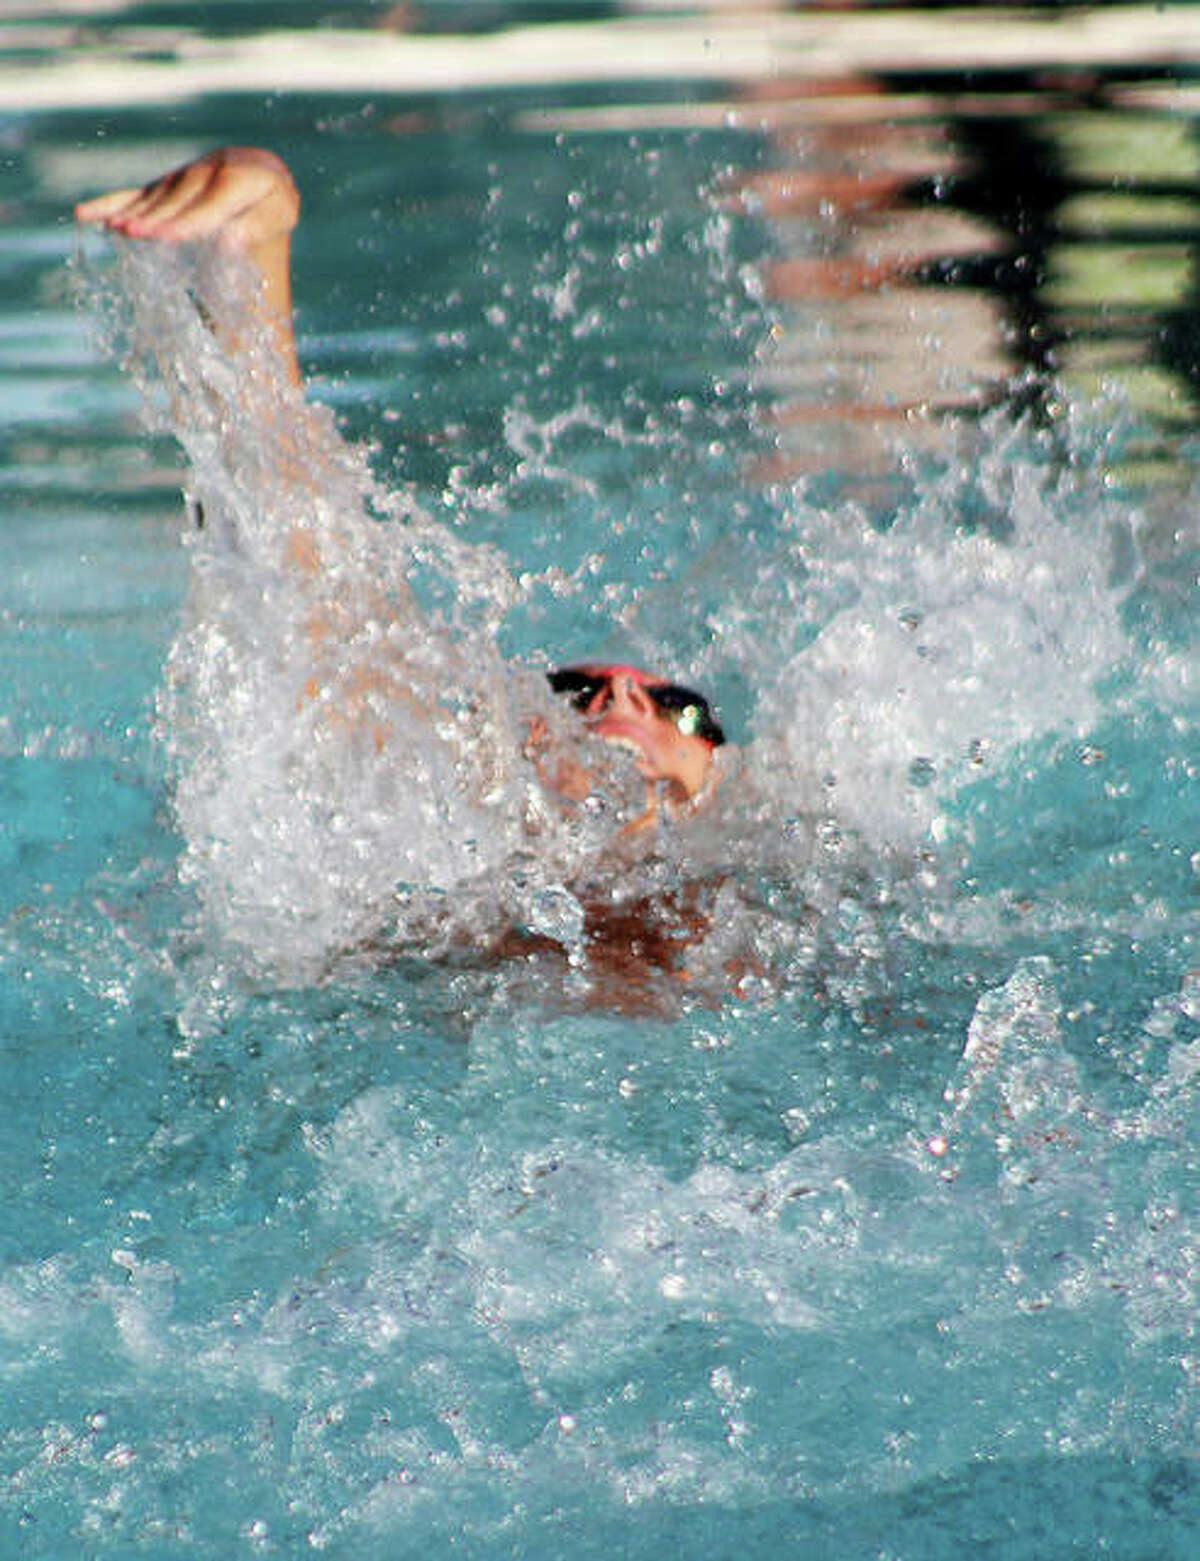 Savannah Grinter of Montclaire does a leg of the 15-18 girls backstroke relay Monday at the SWiSA Relays at Sunset Hills.